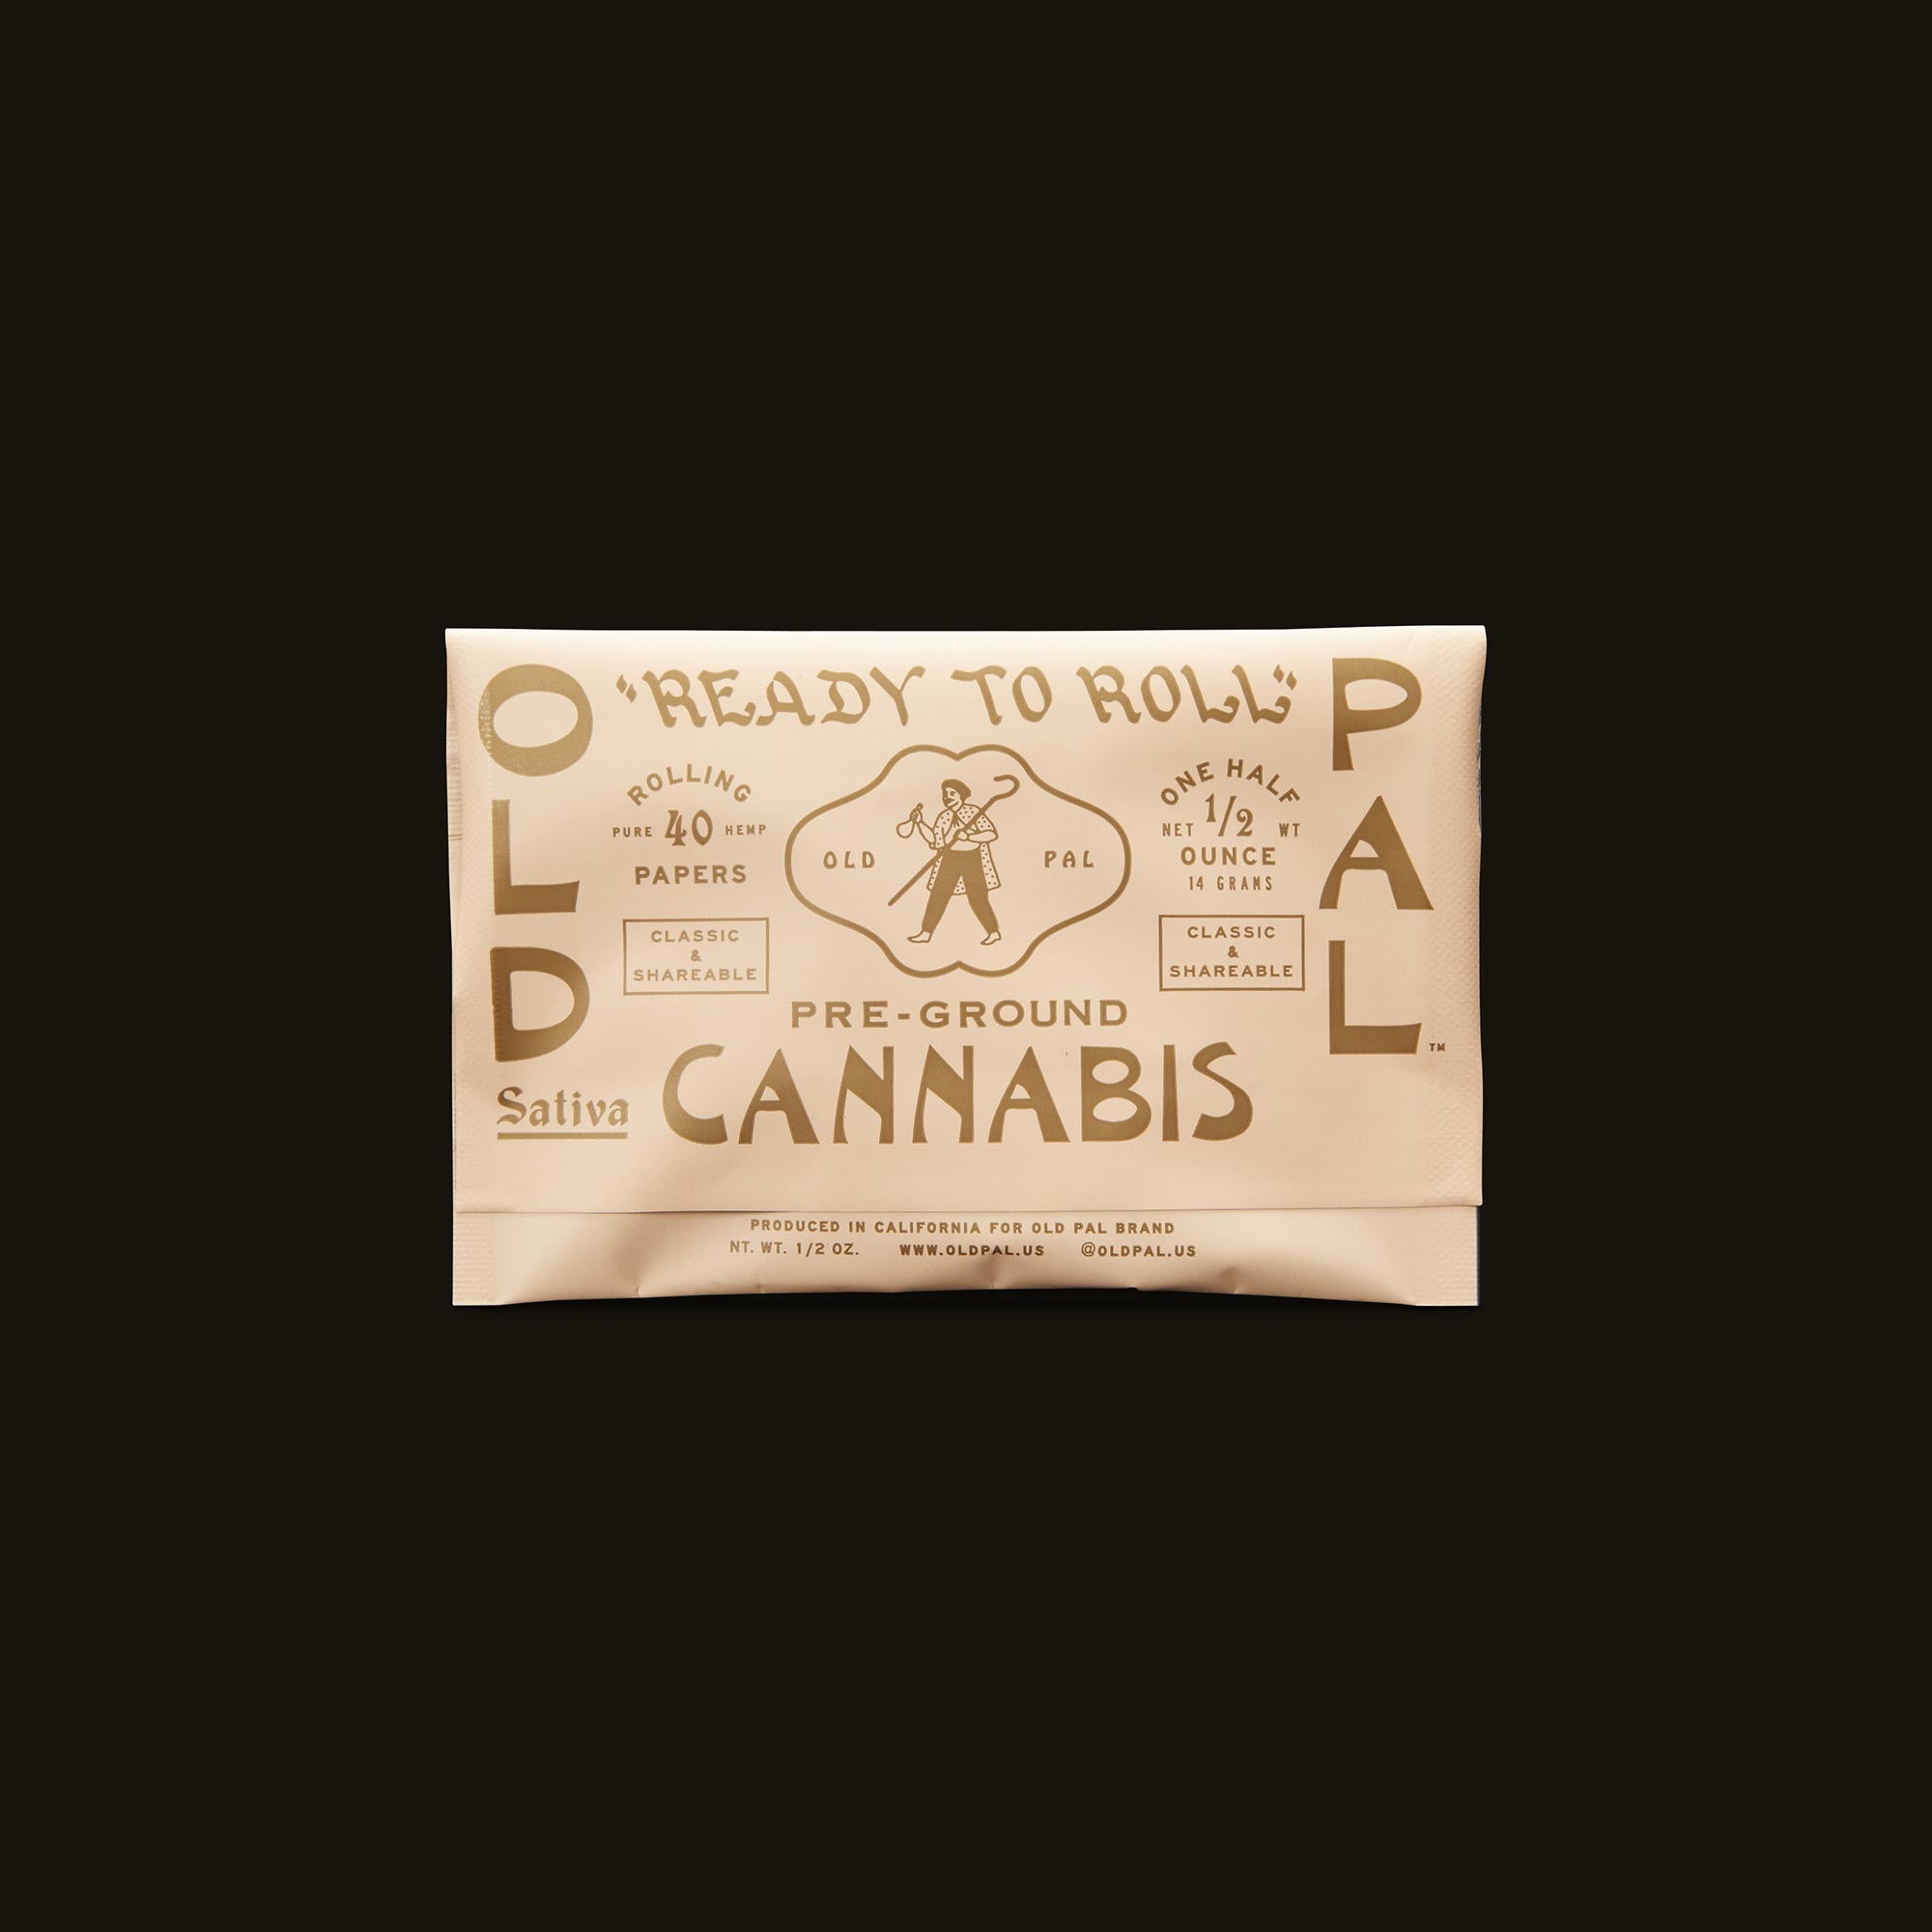 Old-Pal-Reday-to-Roll-Sativa-14g4517-957245